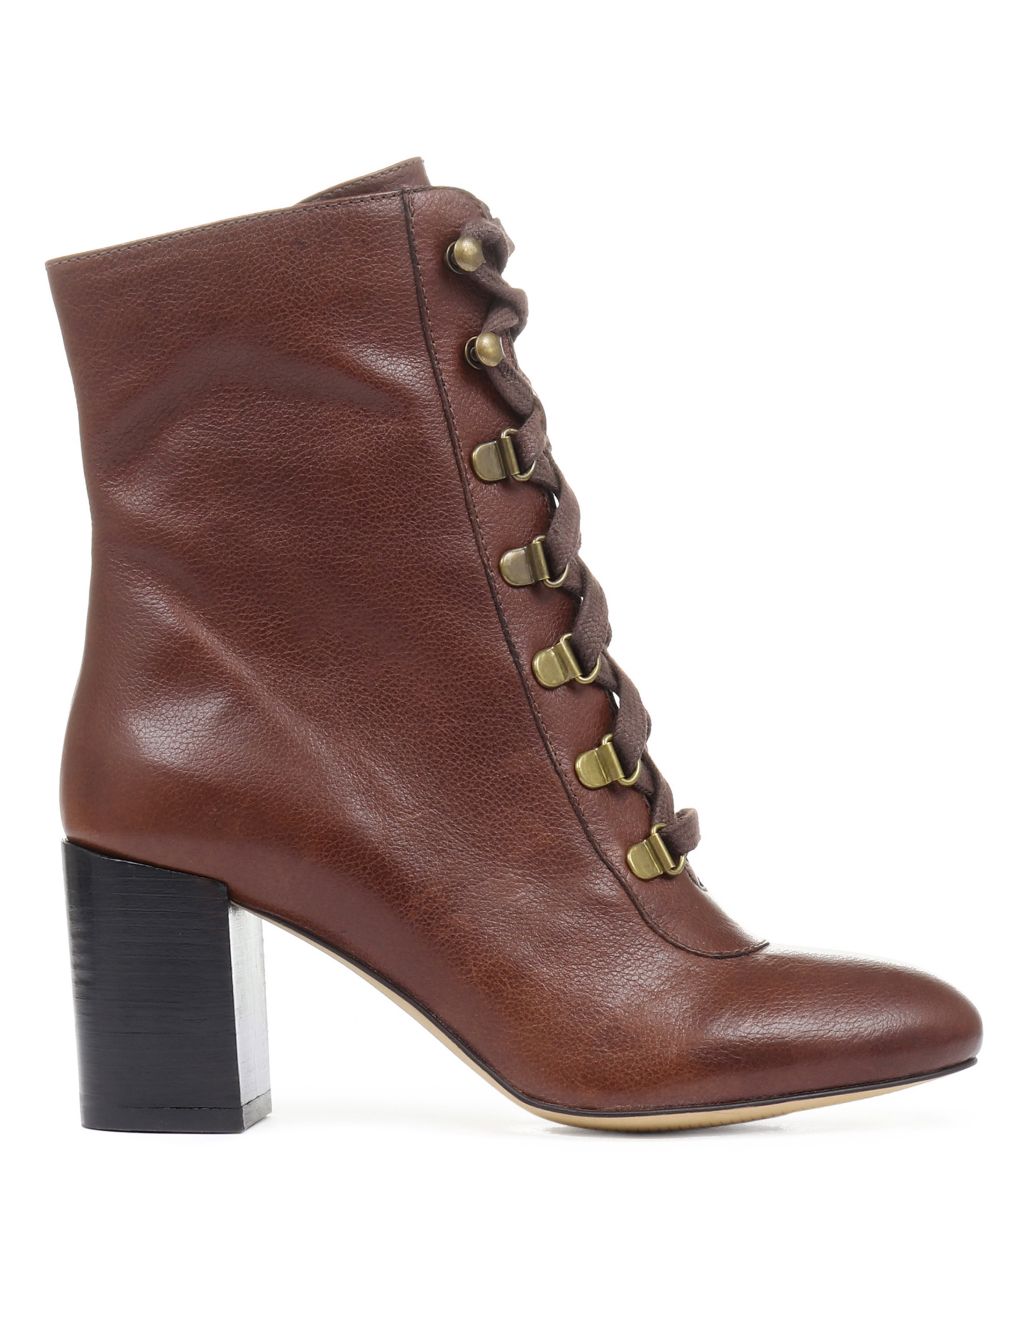 Leather Lace-Up Block Heel Ankle Boots image 4